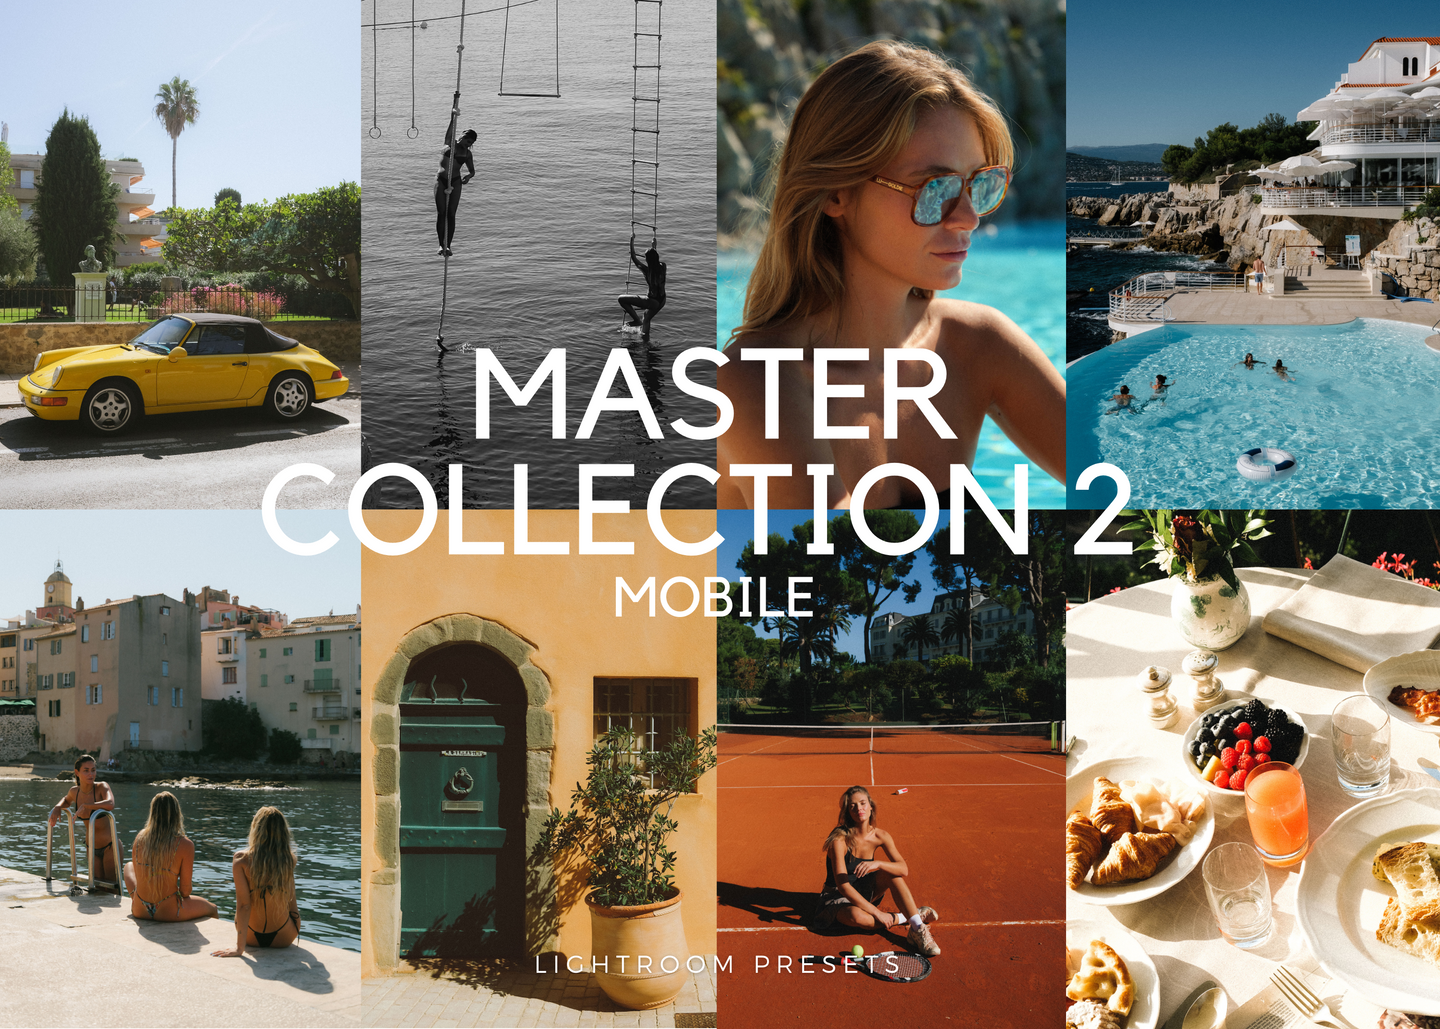 MASTER COLLECTION 2 - MOBILE